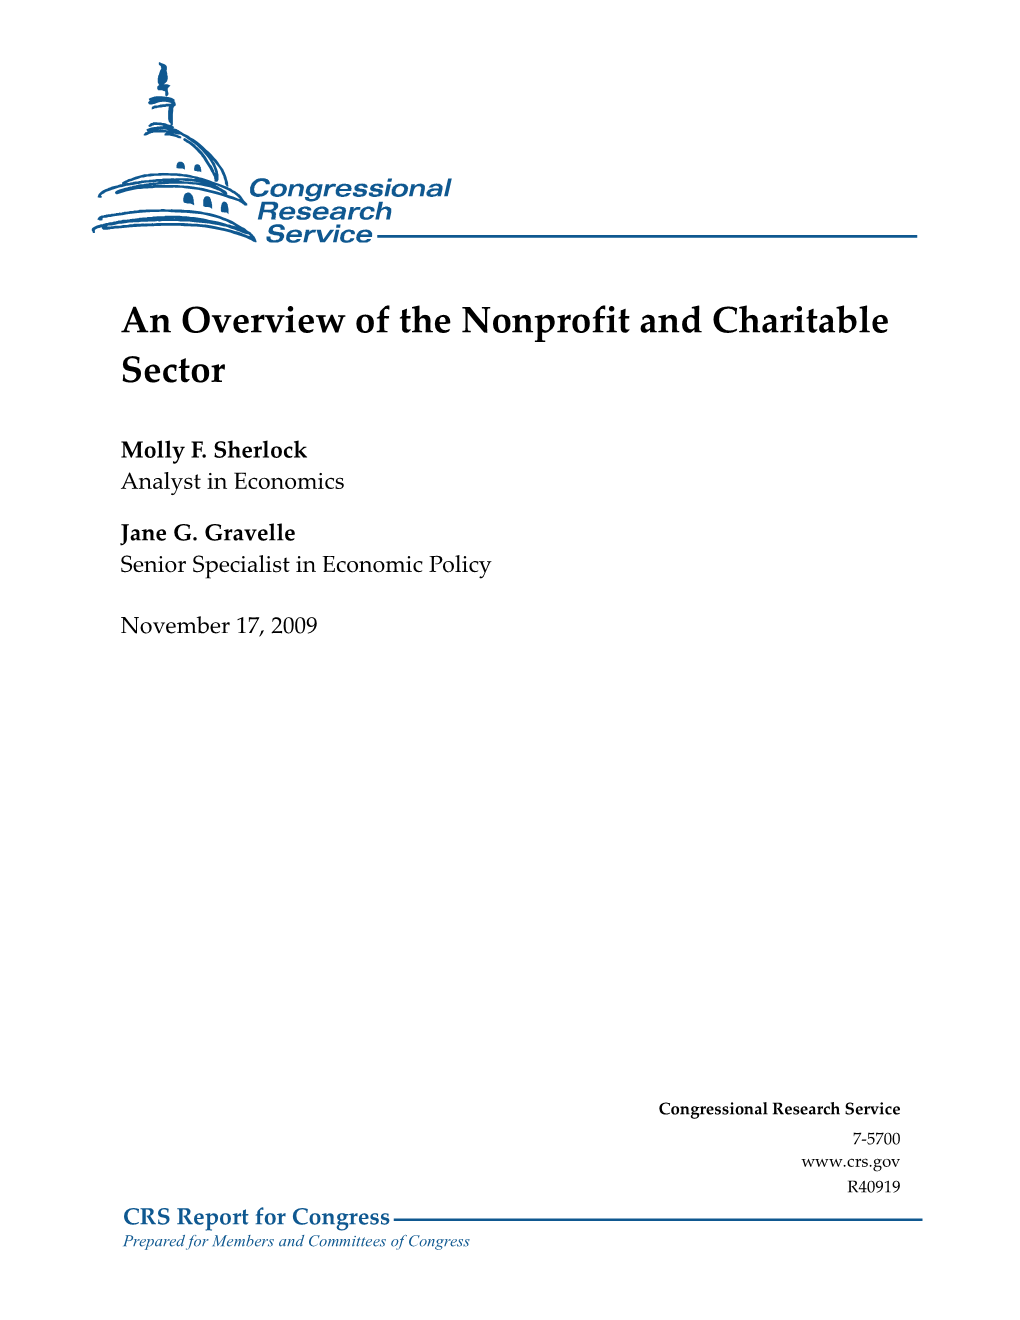 An Overview of the Nonprofit and Charitable Sector